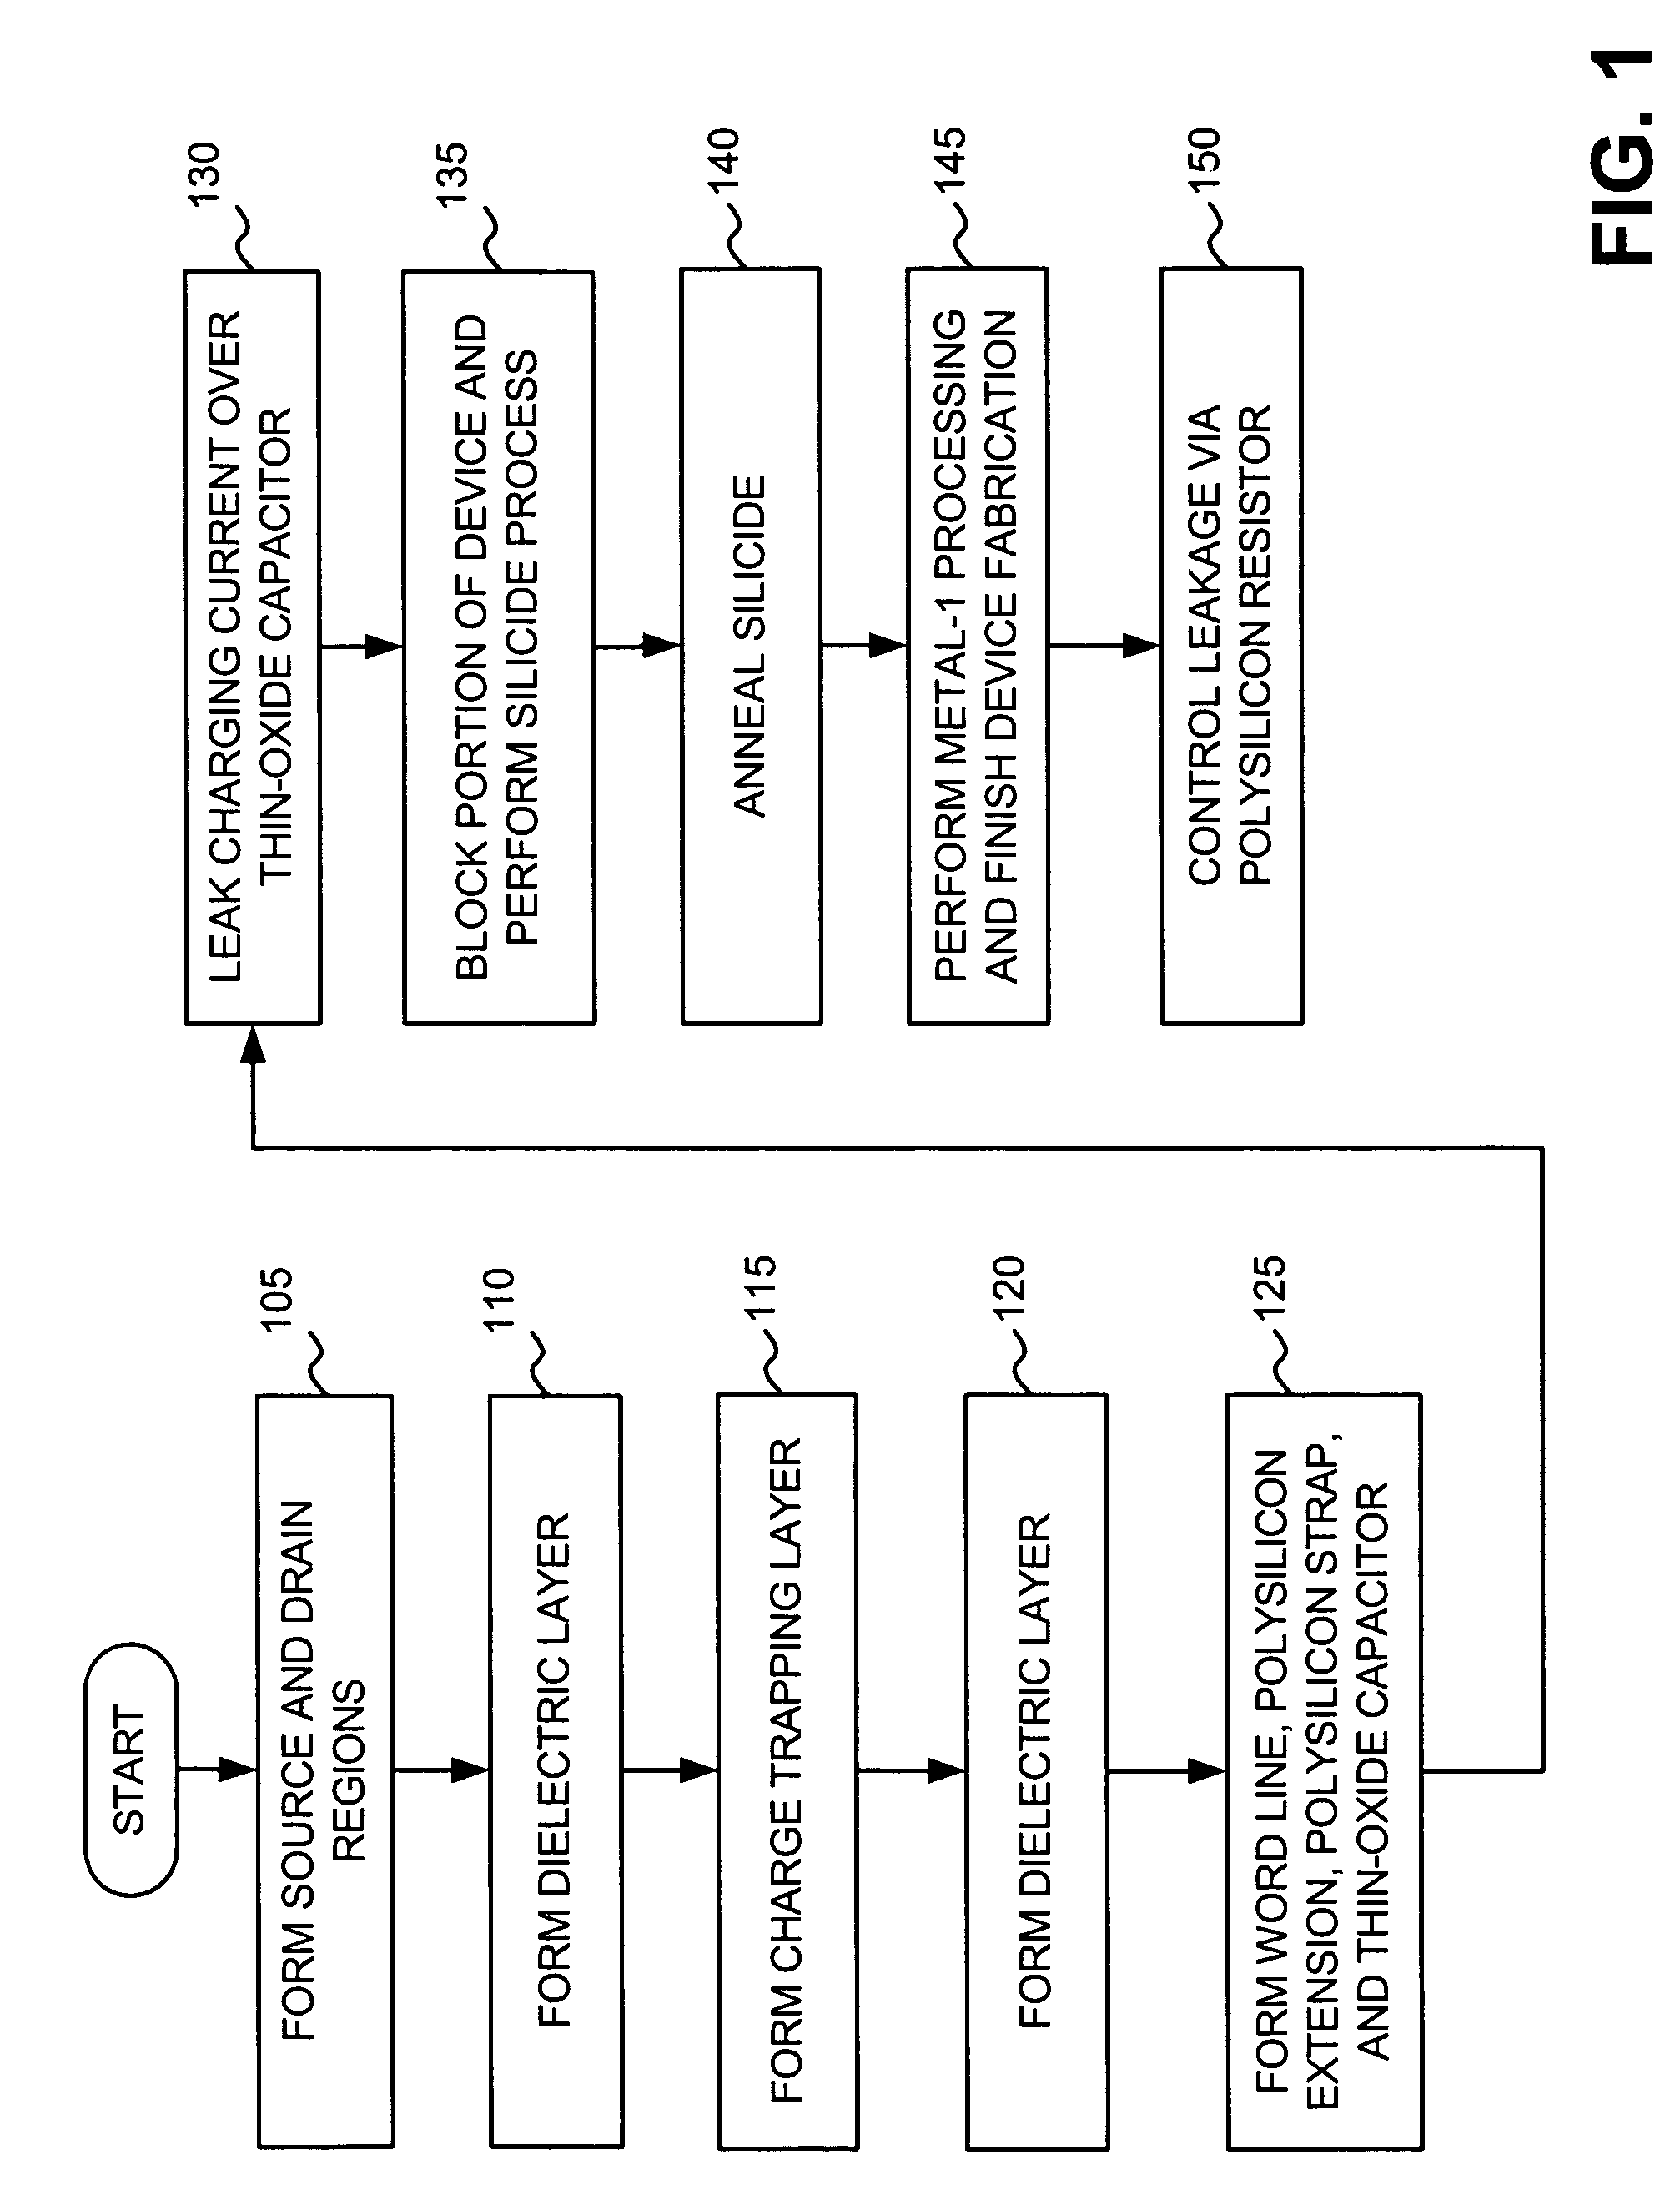 System and method for protecting semiconductor devices